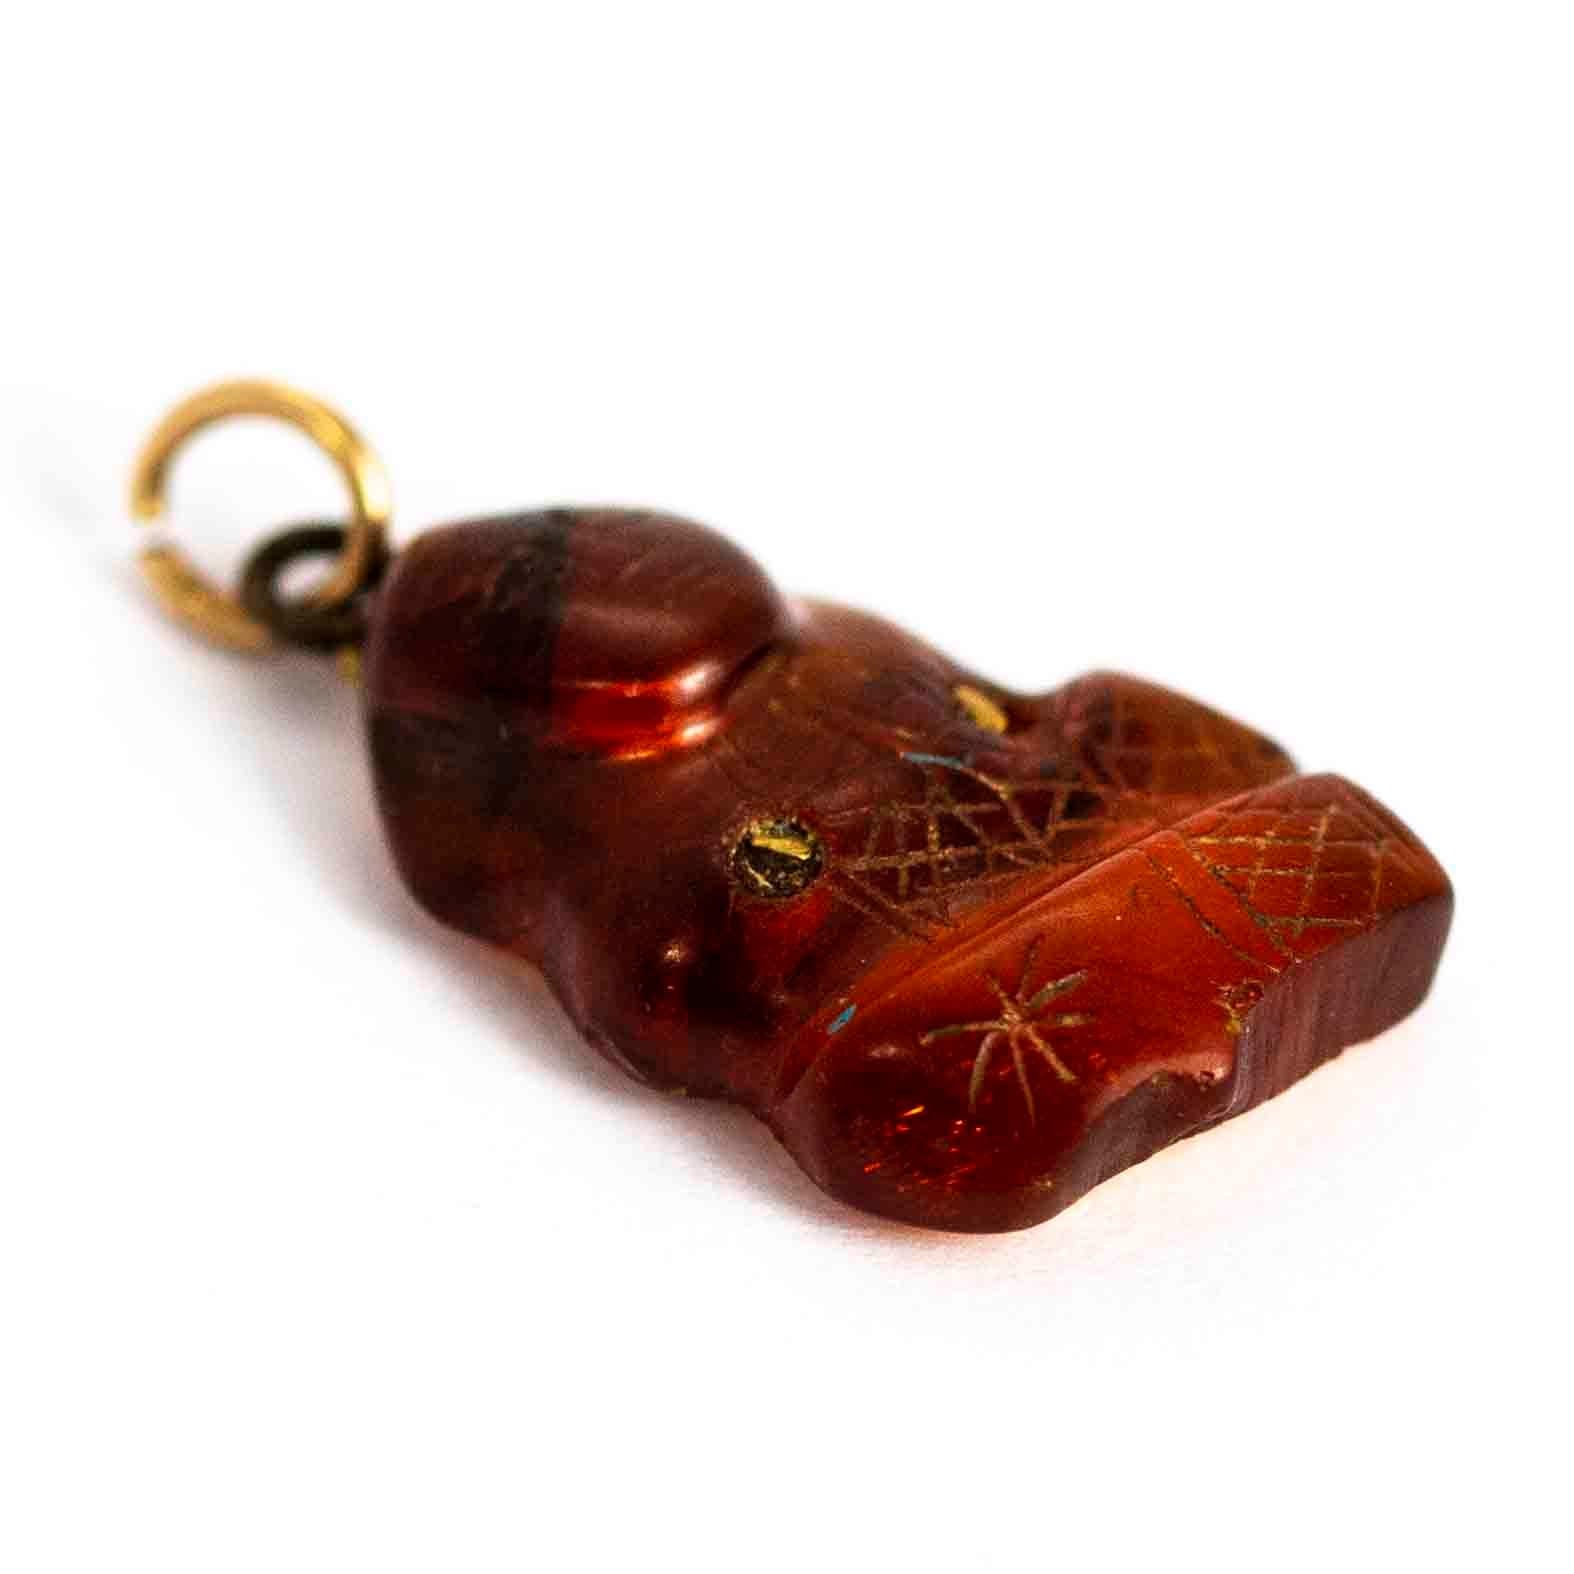 A superb antique amber pendant exquisitely carved in the form of a meditating buddha. Backed with 9 carat yellow gold.

Dimensions: 20mm x 12mm